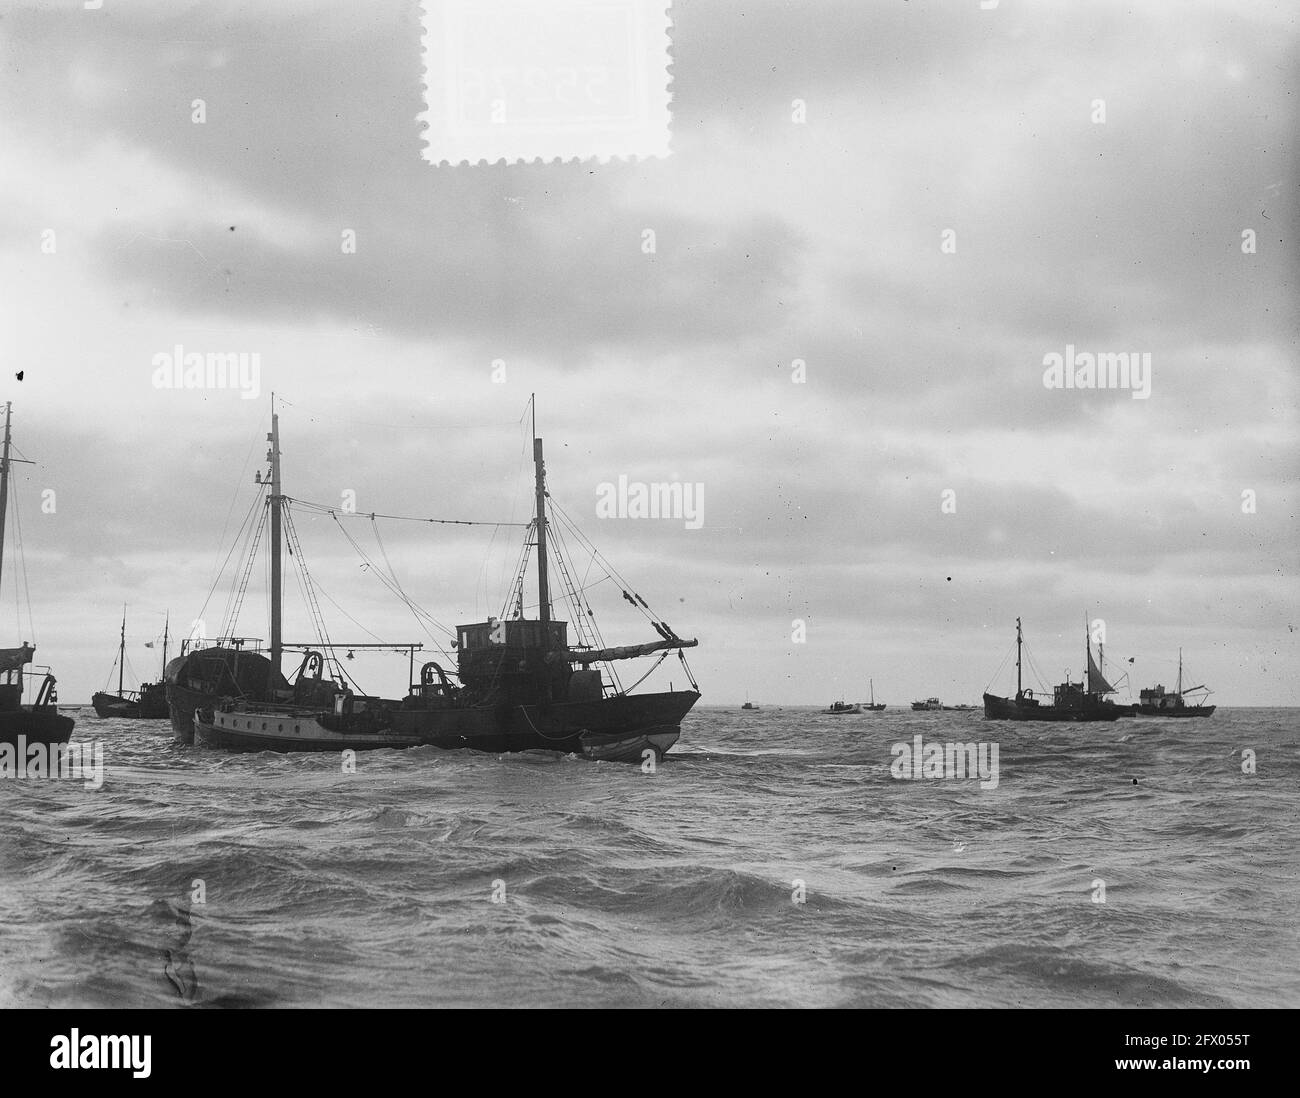 Ships on Haringvliet on their way to Zierikzee, February 5, 1953, ships, flood, The Netherlands, 20th century press agency photo, news to remember, documentary, historic photography 1945-1990, visual stories, human history of the Twentieth Century, capturing moments in time Stock Photo